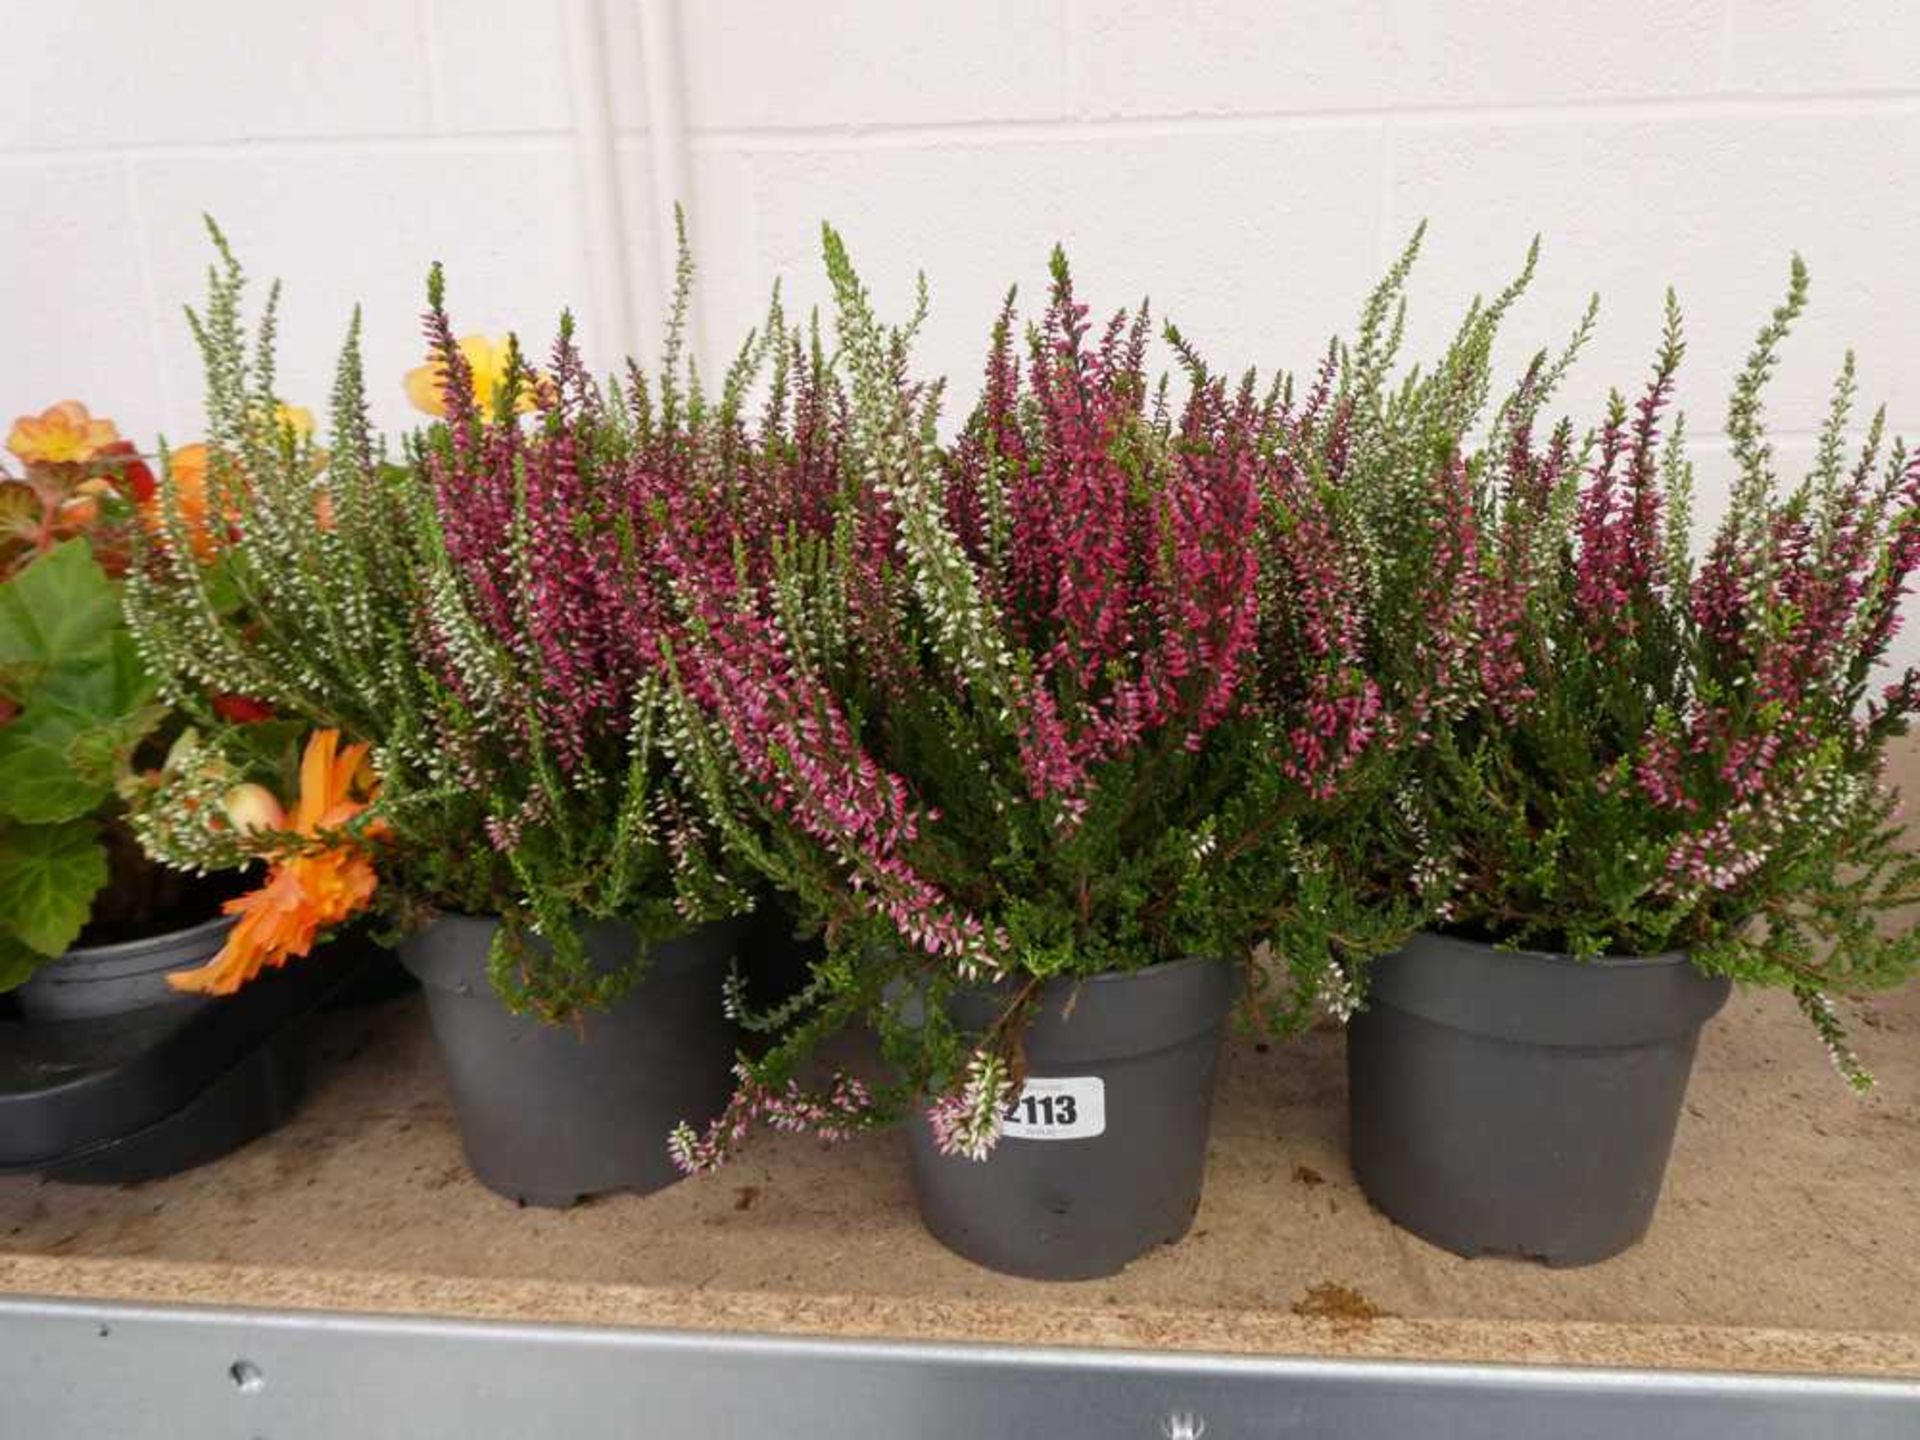 5 pots of purple and white heather